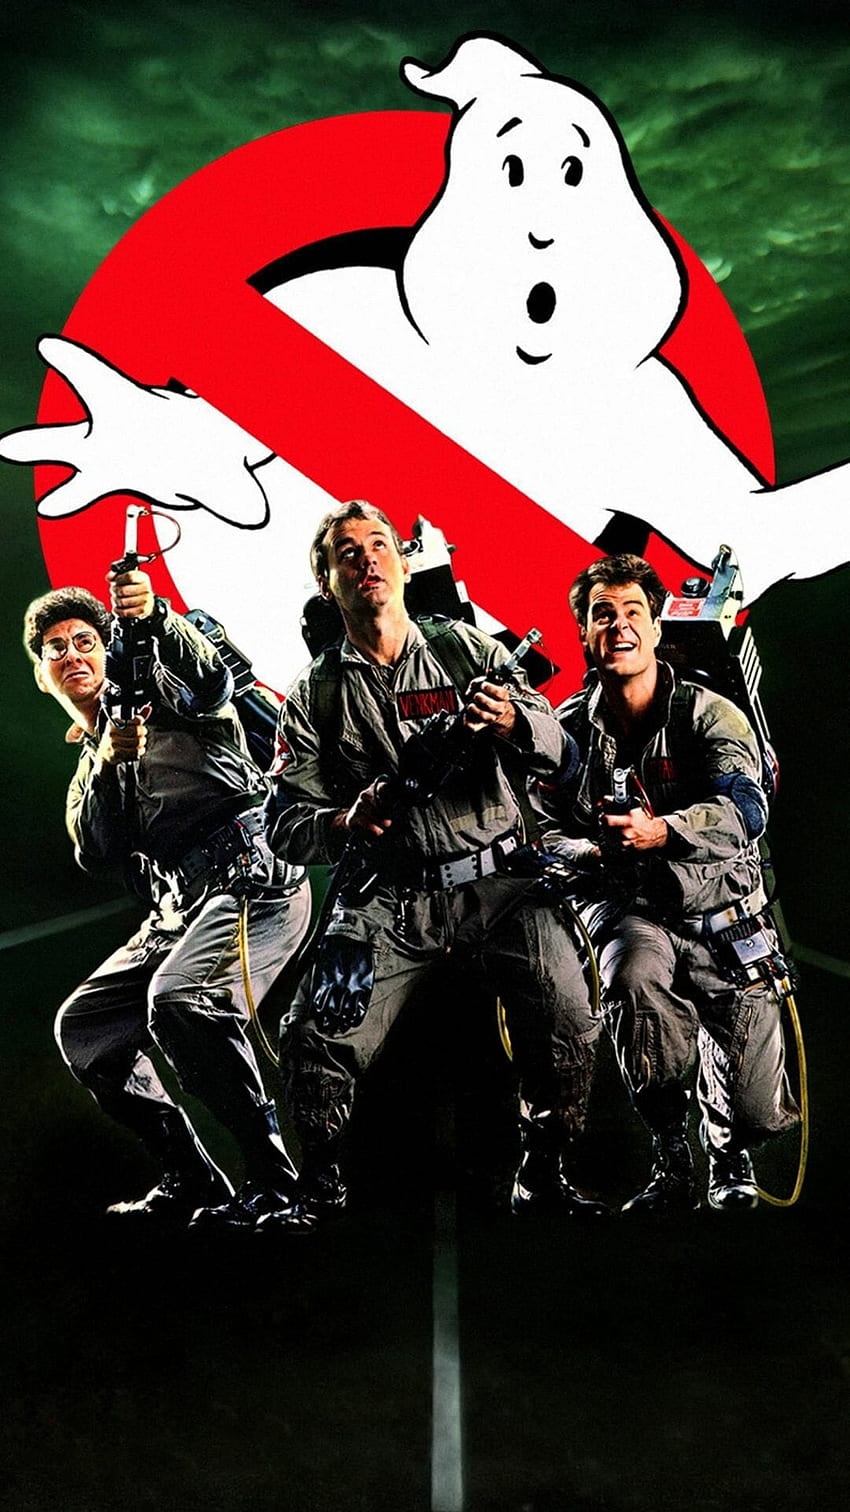 90 Ghostbusters (1984) Telepon . MOVIE POSTERS di 2019 - Android / iPhone Background (png / jpg) (2022), Ghostbusters Logo wallpaper ponsel HD